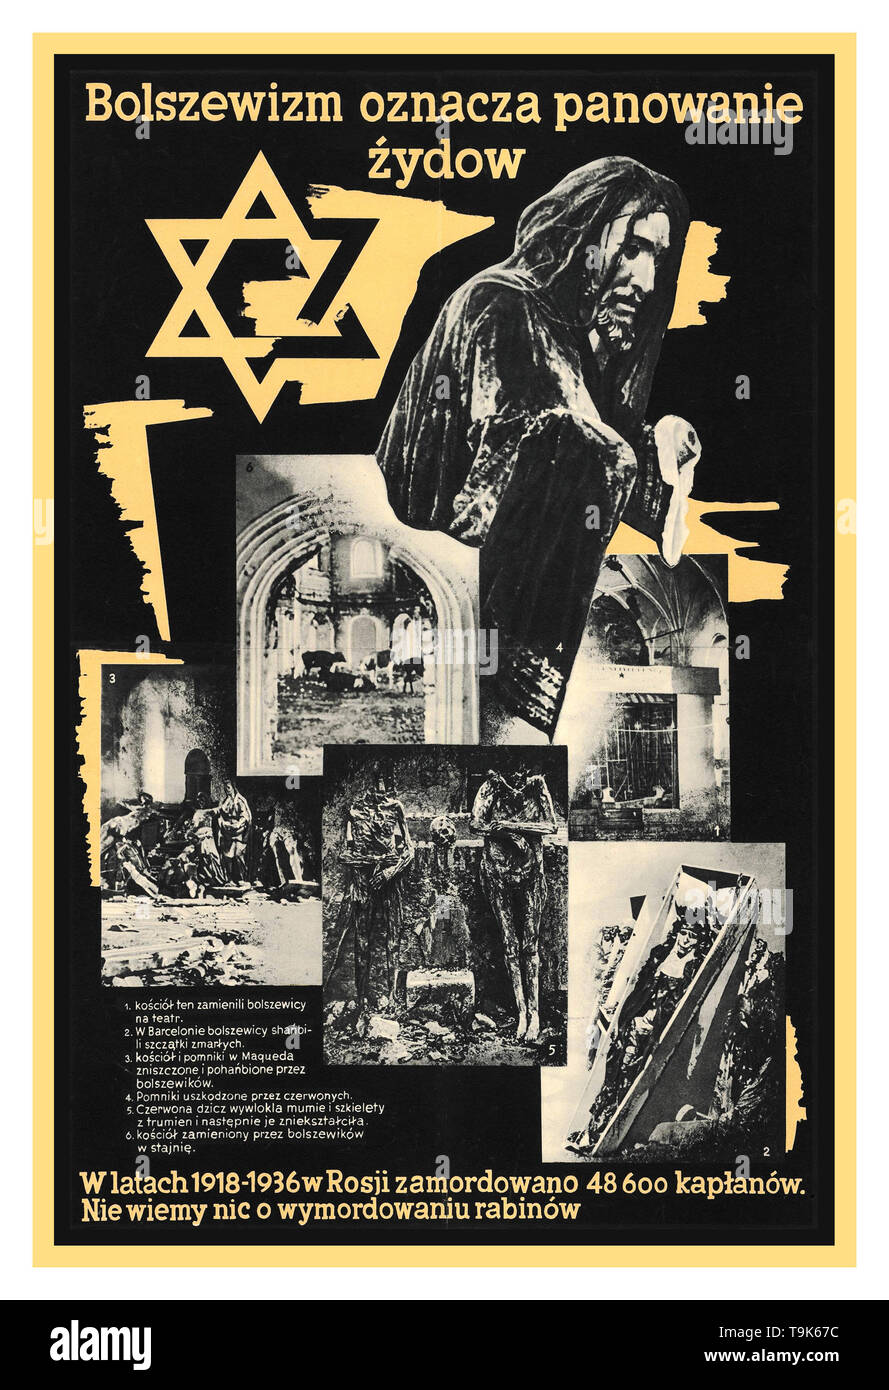 Vintage WW2 Nazi anti semitic propaganda poster in occupied Poland 'Bolshevism means Jewish dominance'. 'Between 1918 and 1936 48600 priests were murdered in Russia. We haven't heard anything about killing rabbis.' Nazi Germany Occupied Poland, 1941 World War II Stock Photo